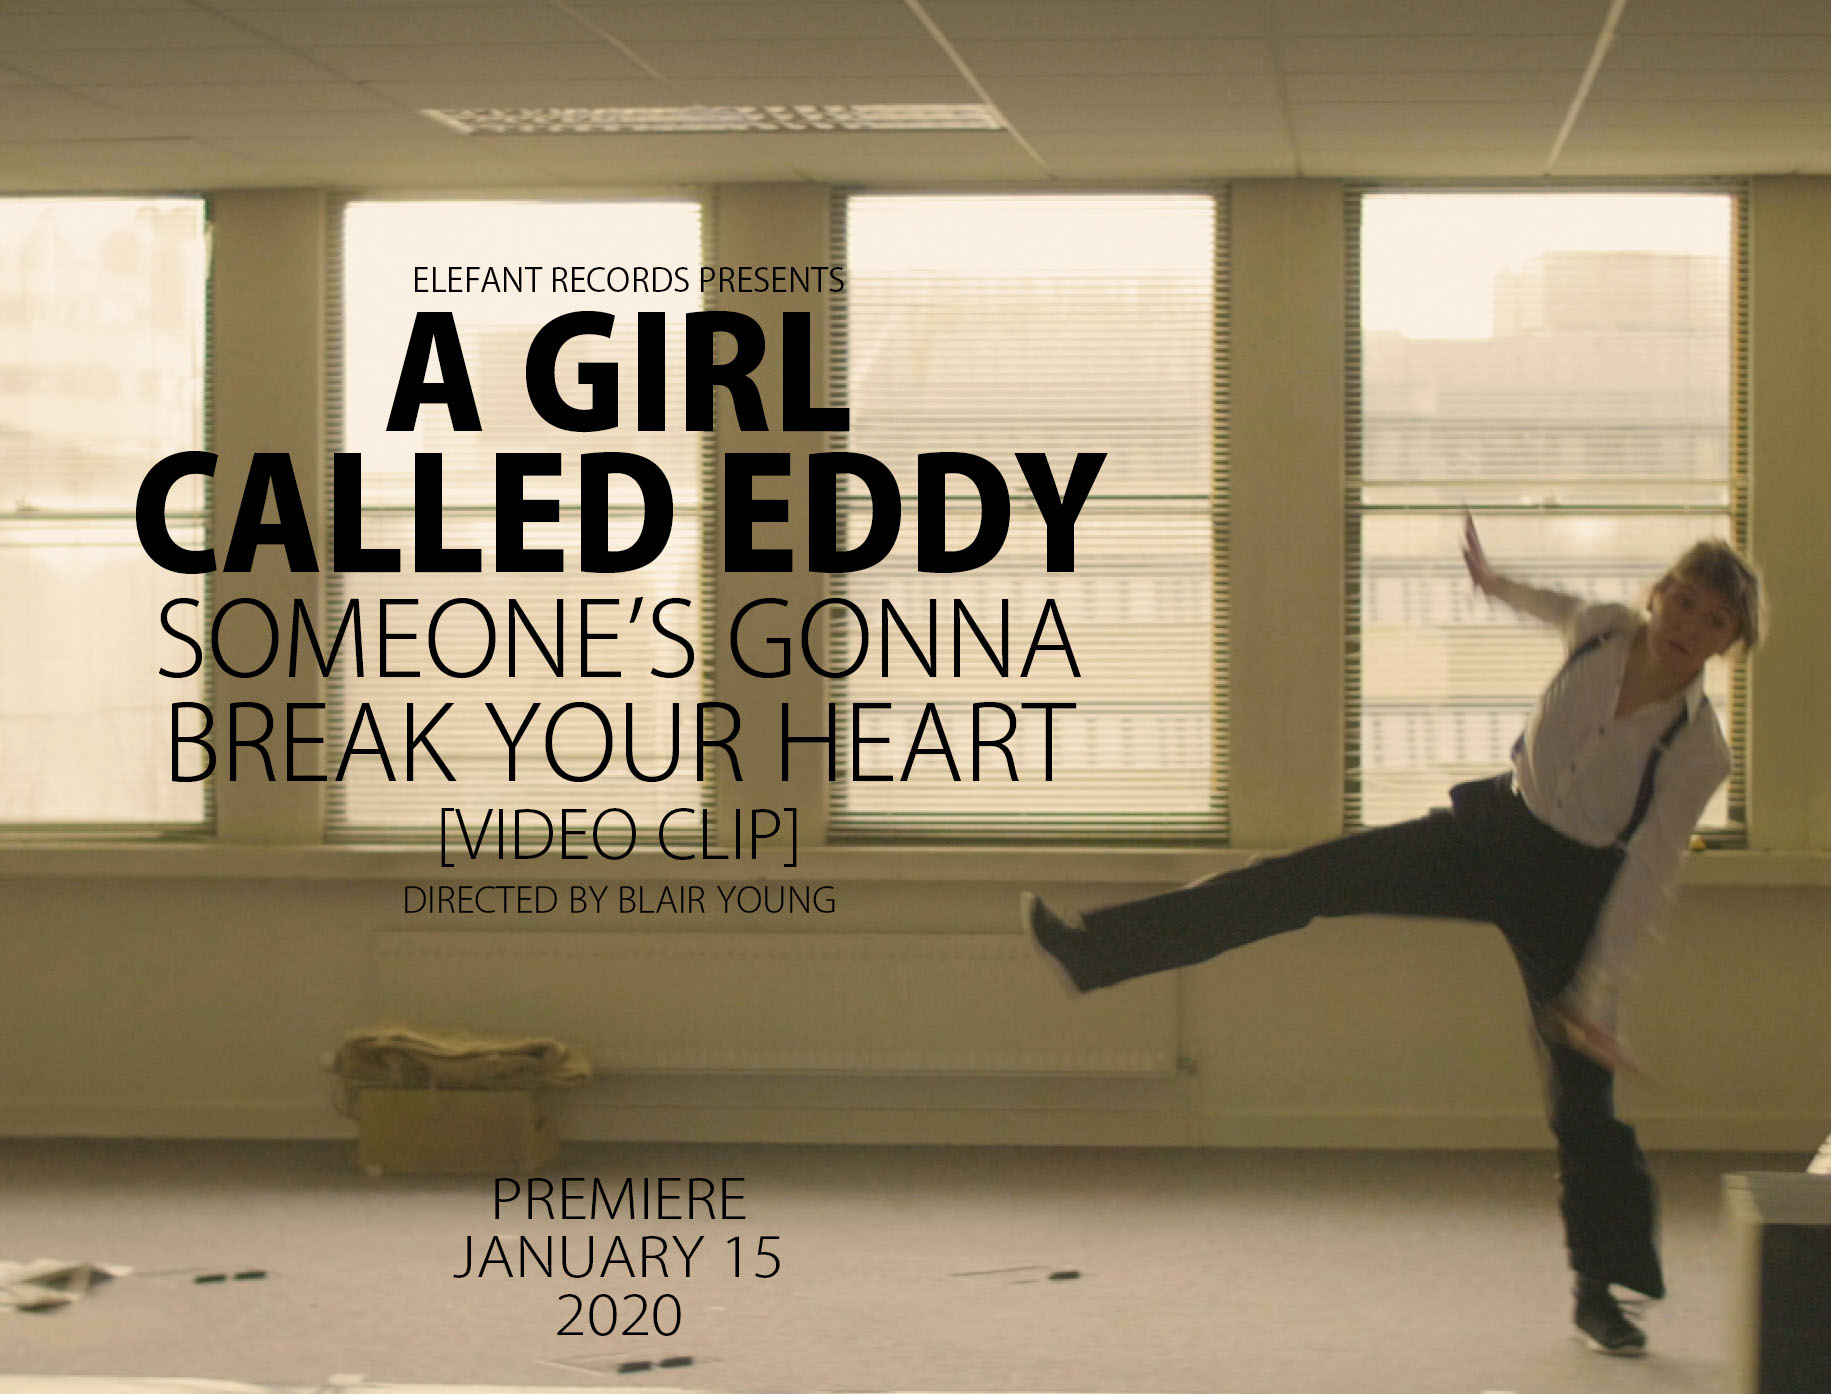 A Girl Called Eddy "Someone’s Gonna Break Your Heart"